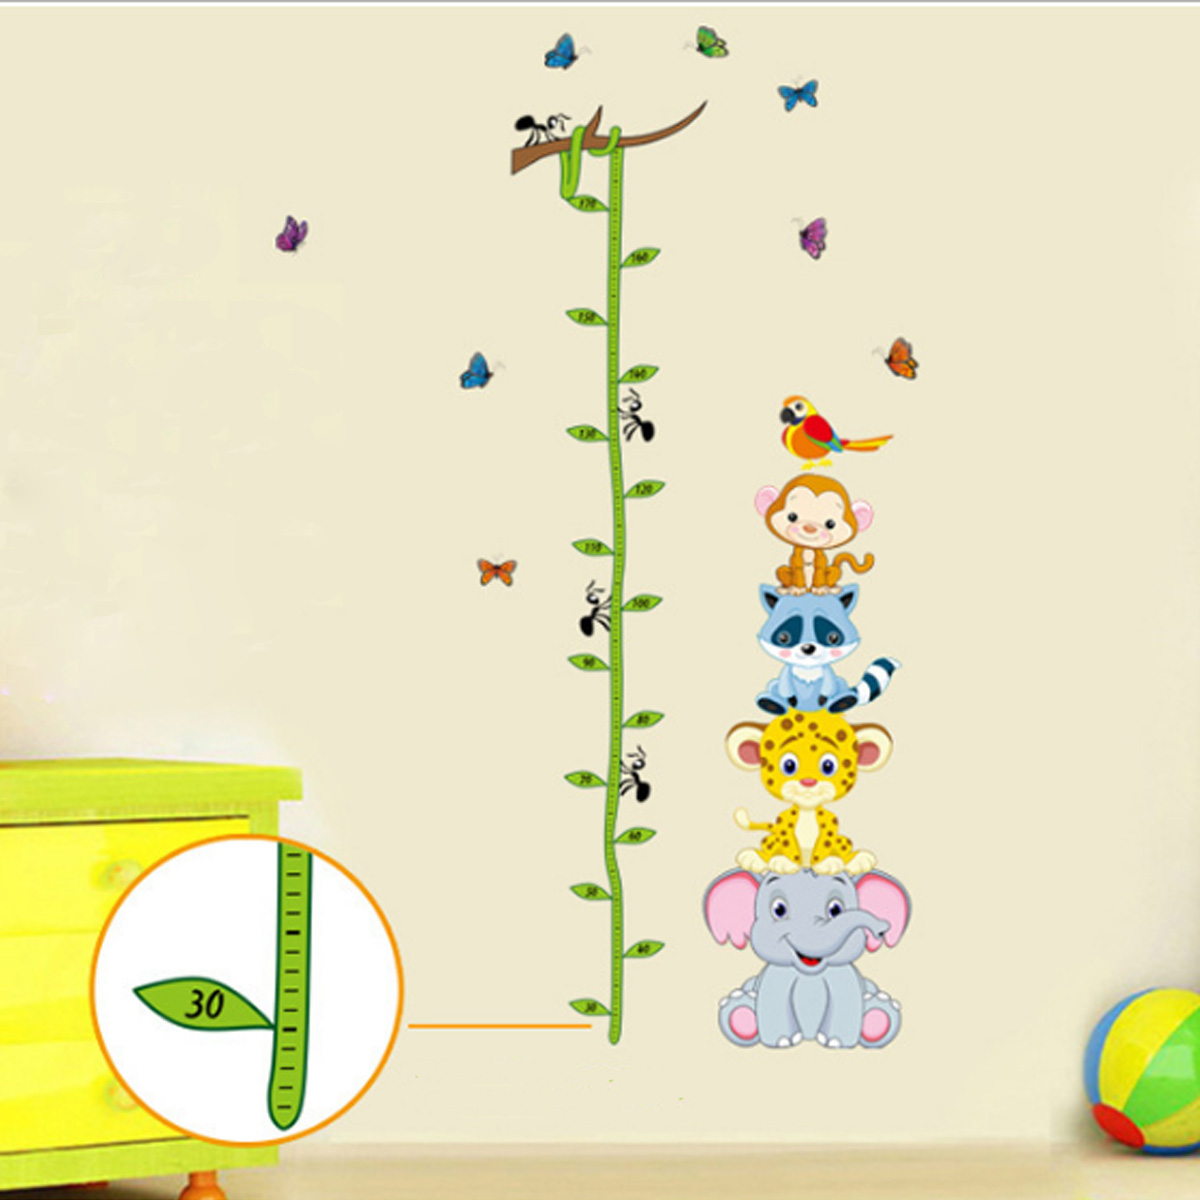 Animals-Height-Chart-Non-toxic-Removable-Wall-Stickers-Kids-Nursery-Elephant-Leopard-Sticker-Decor-1567408-6